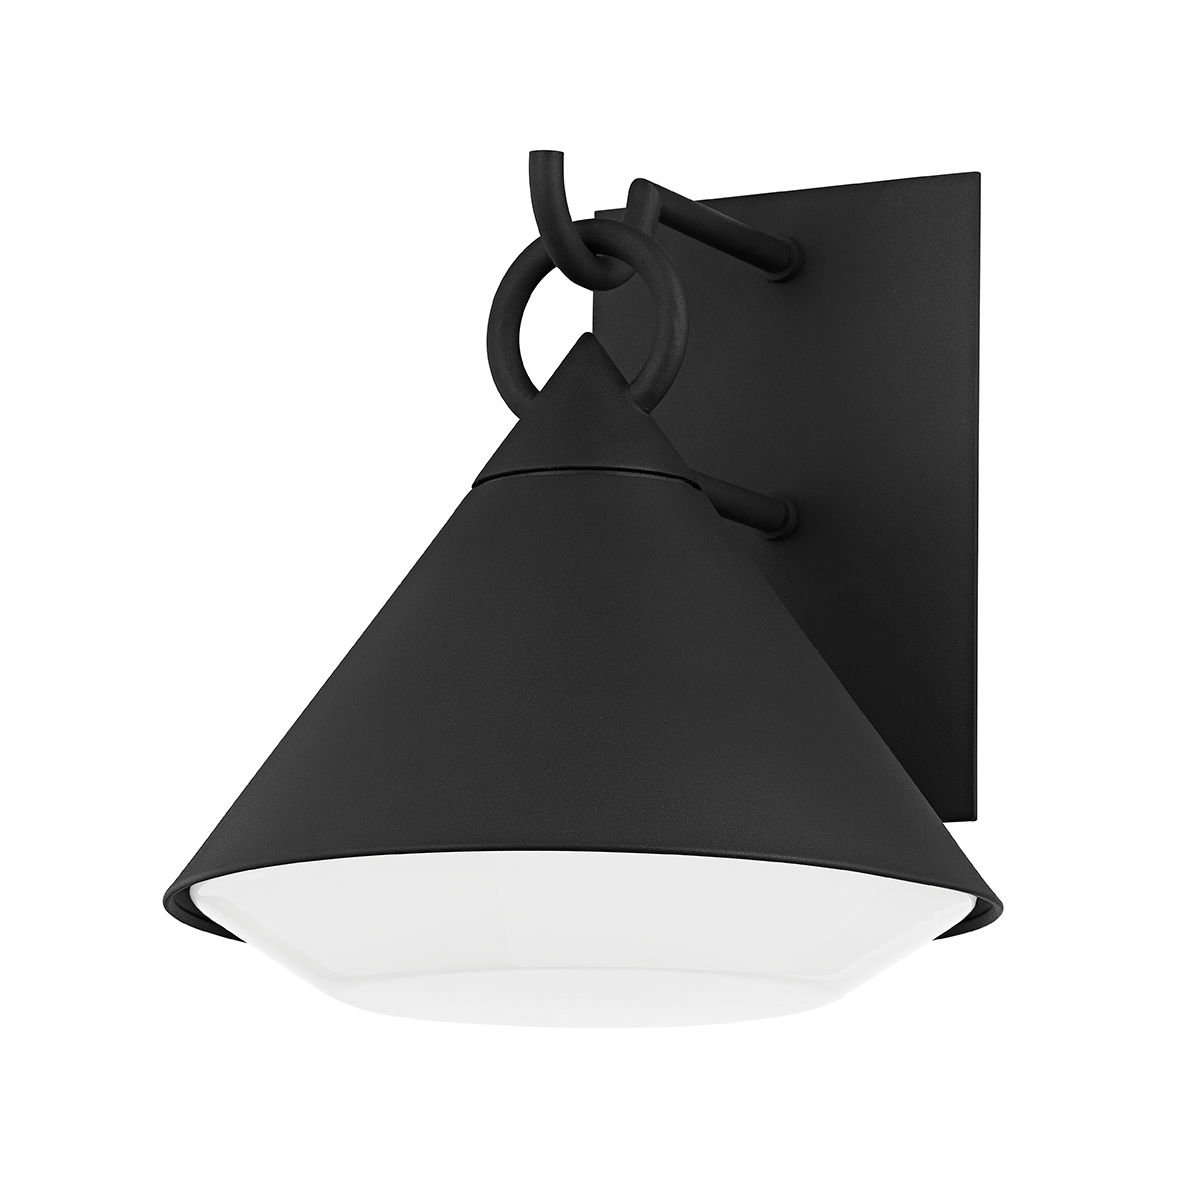 Troy CATALINA 1 LIGHT LARGE EXTERIOR WALL SCONCE B9212 Outdoor l Wall Troy Lighting TEXTURE BLACK  